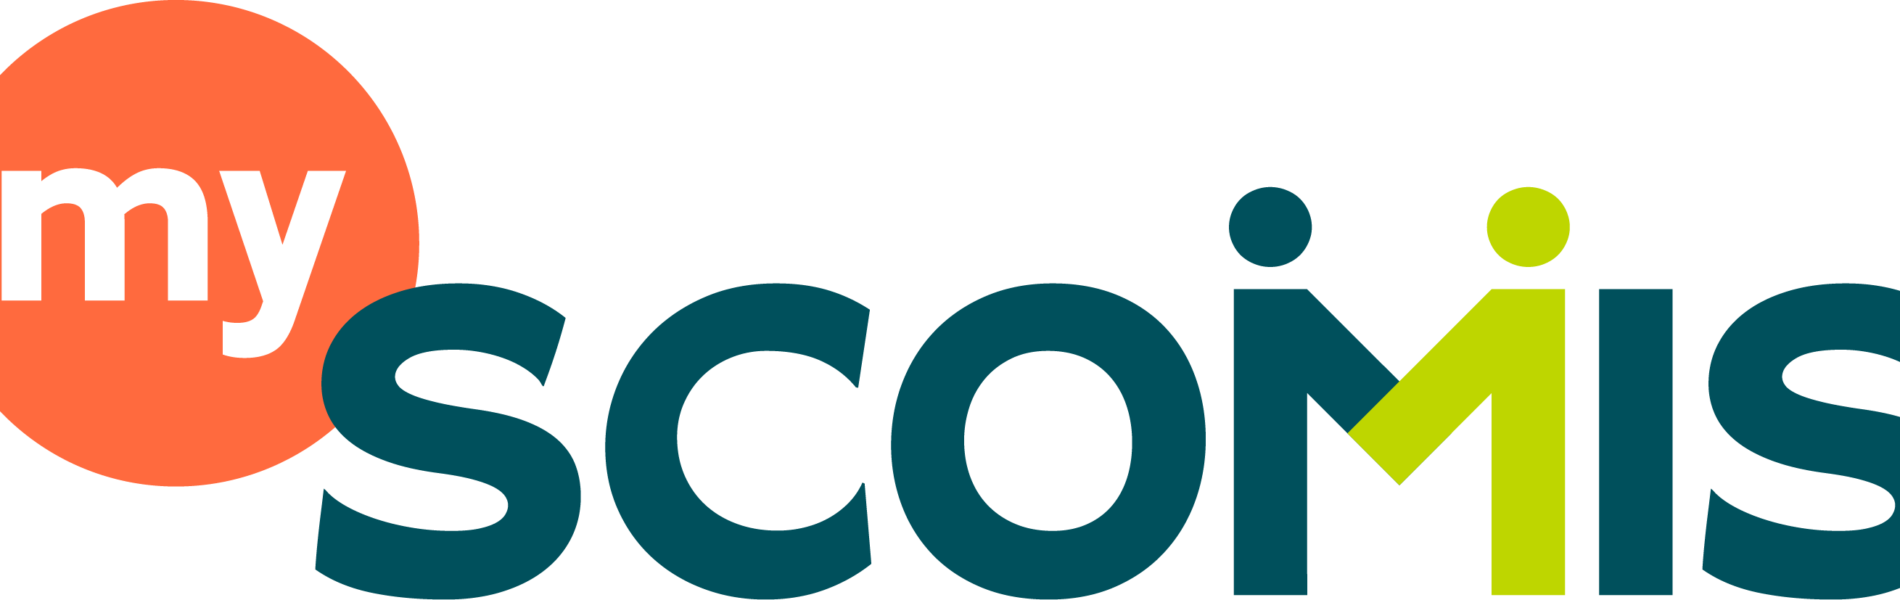 Logo for 'myScomis' comprising a coral coloured circle with the word 'my' inside, joined to the main Scomis logo in caps in dark green with the 'M' forming two figures shaking hands.